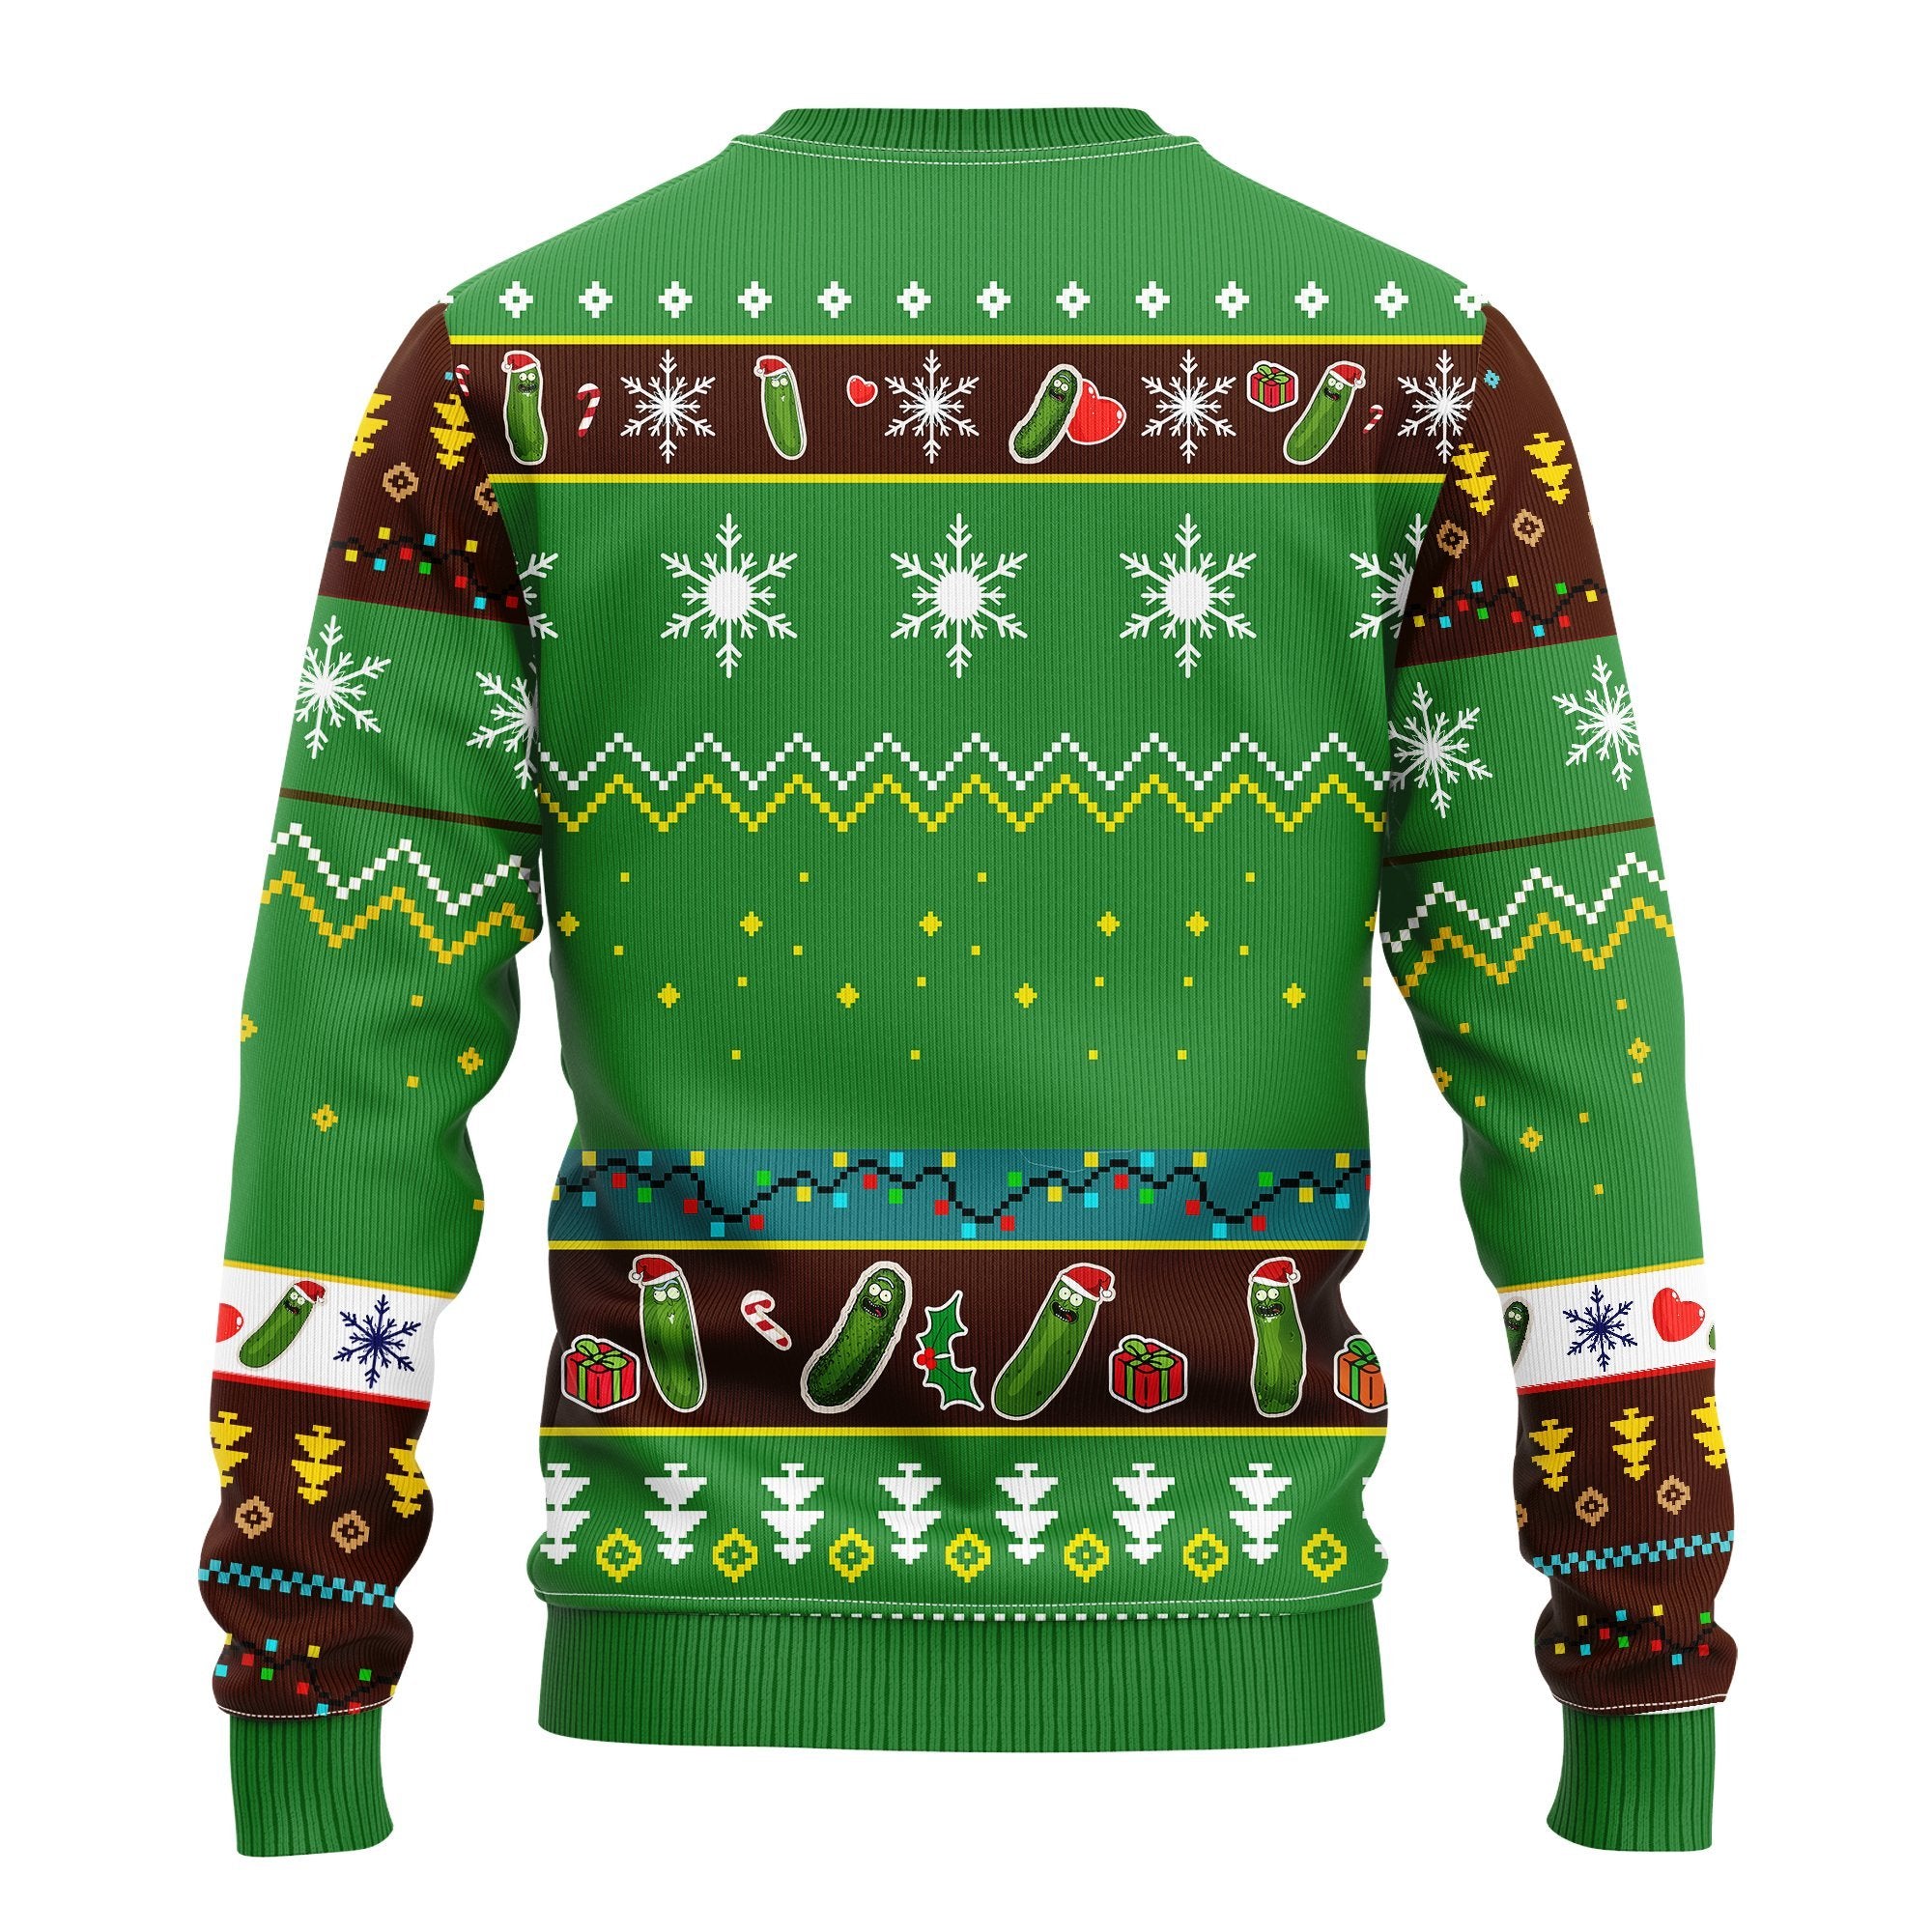 Pickle Rick Rick And Morty Ugly Christmas Sweater Green 2 Amazing Gift Idea Thanksgiving Gift